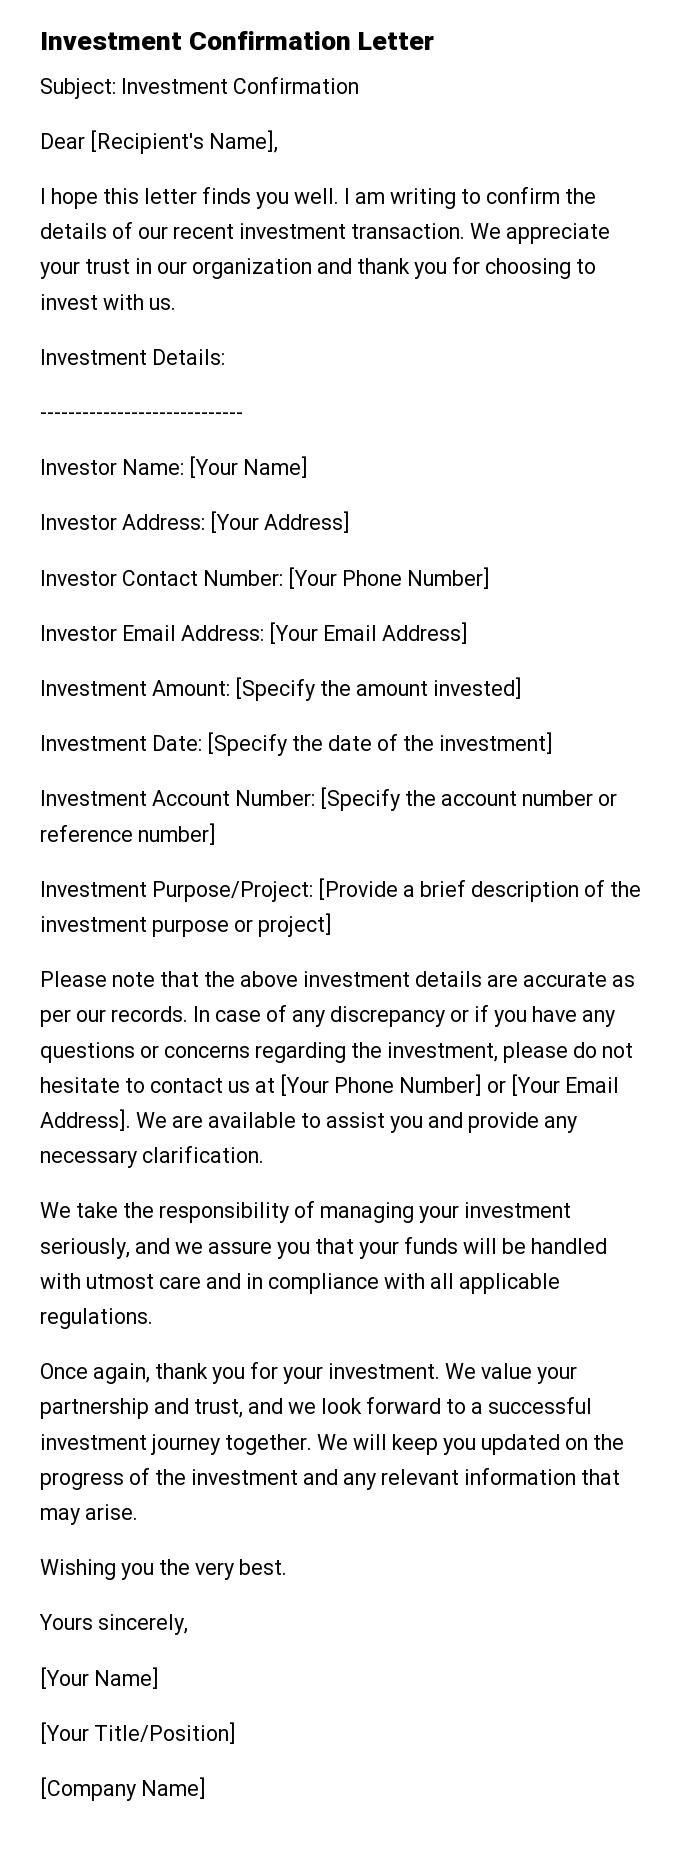 Investment Confirmation Letter